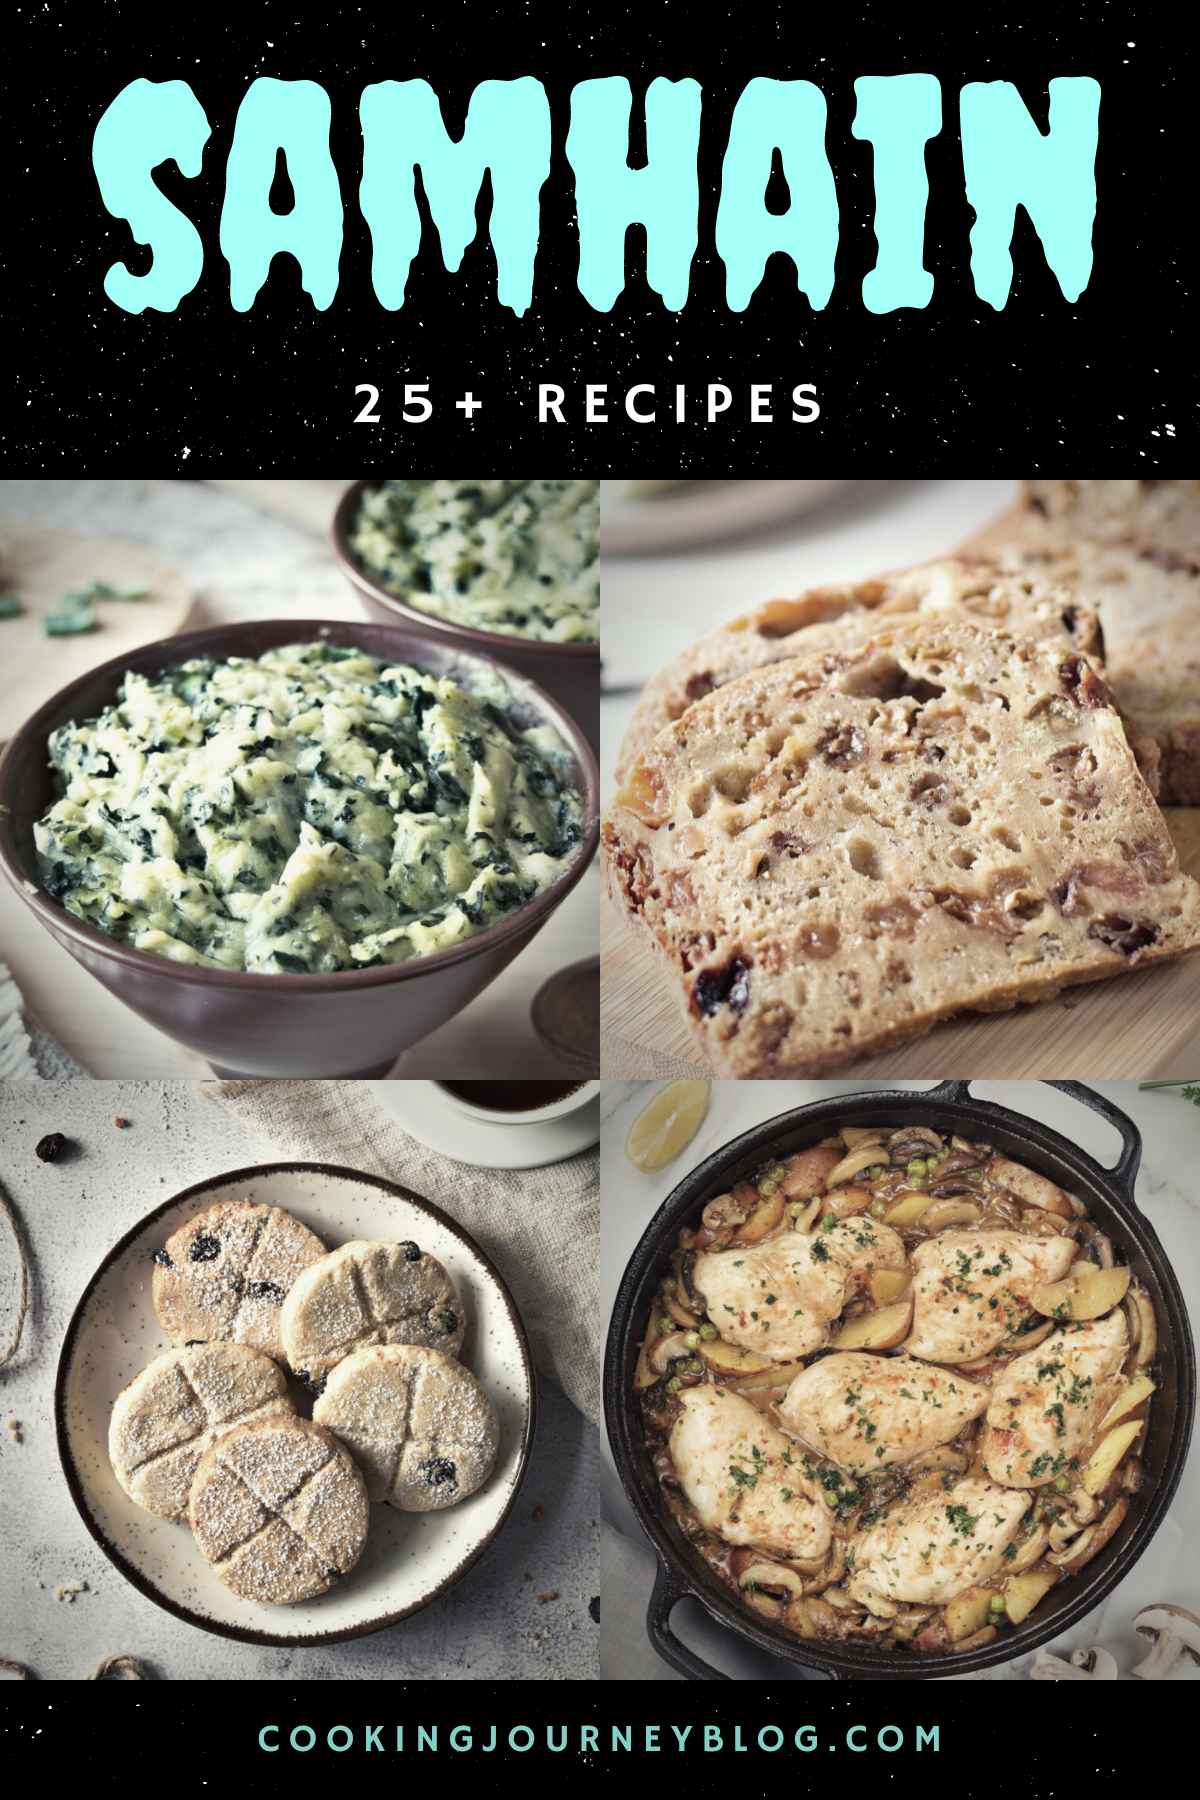 Samhain recipes: colcannon, barmbrack, soul cakes and mustard chicken